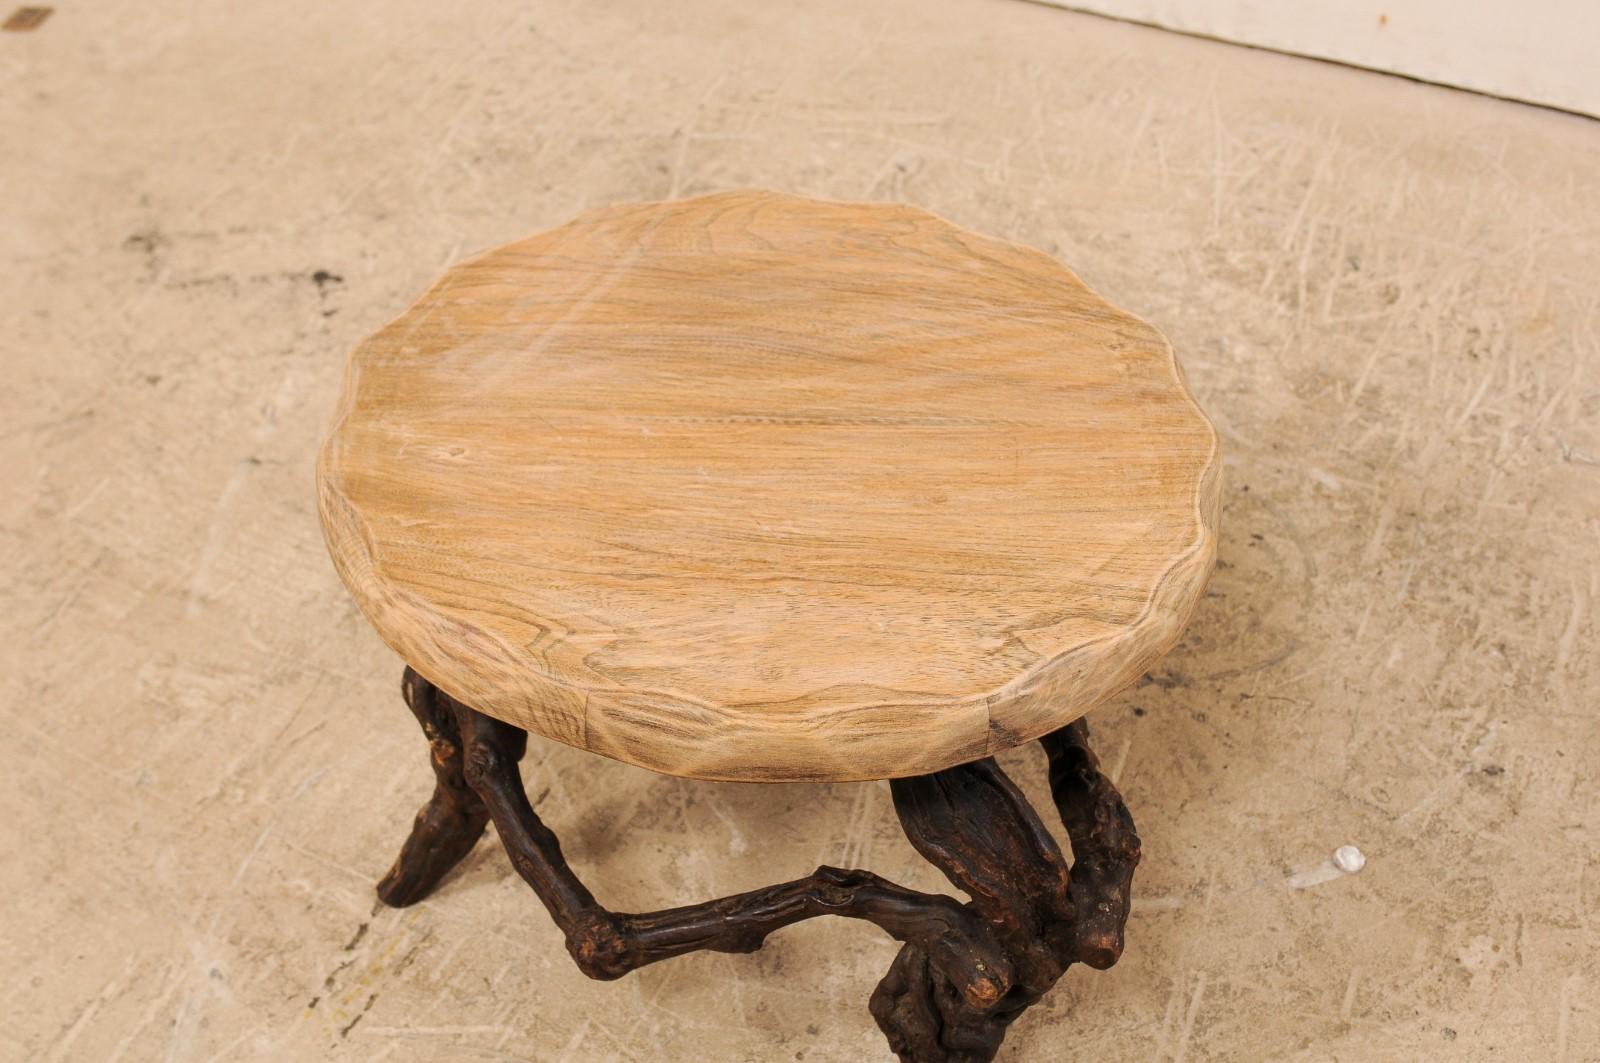 A French small sized coffee table with grapevine base from the early 20th century. This wonderfully informal antique table from France features a round-shaped wood slab top with carved scalloped edges, atop a natural grapevine base. This fabulous